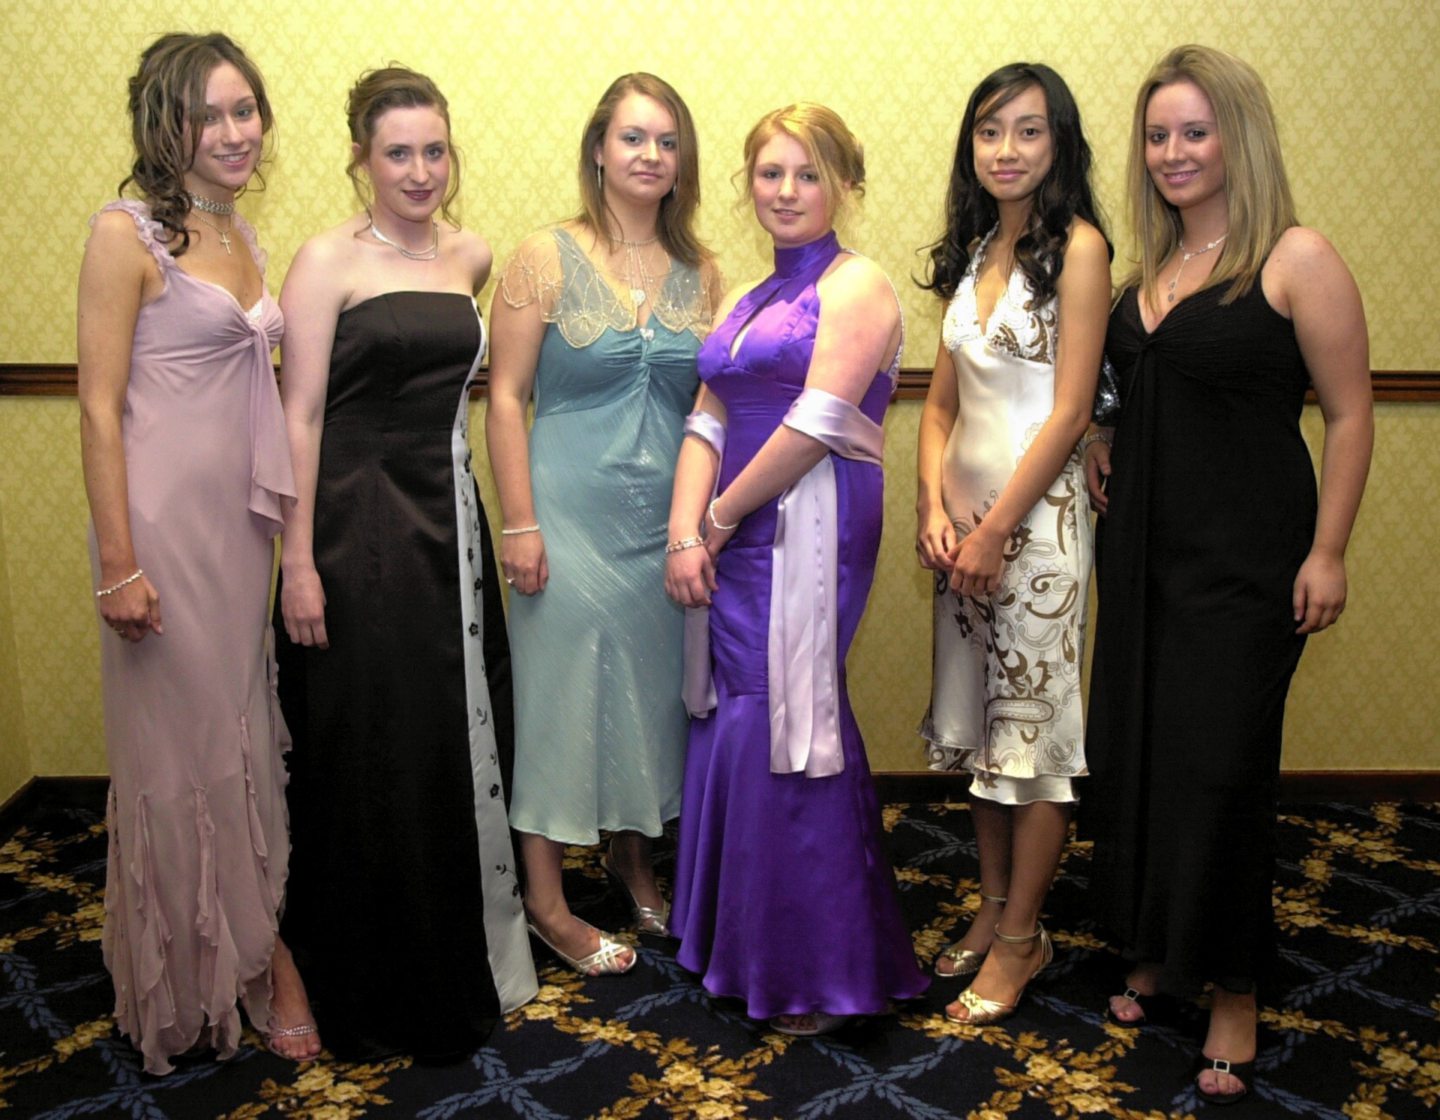 Group of girls at the prom.